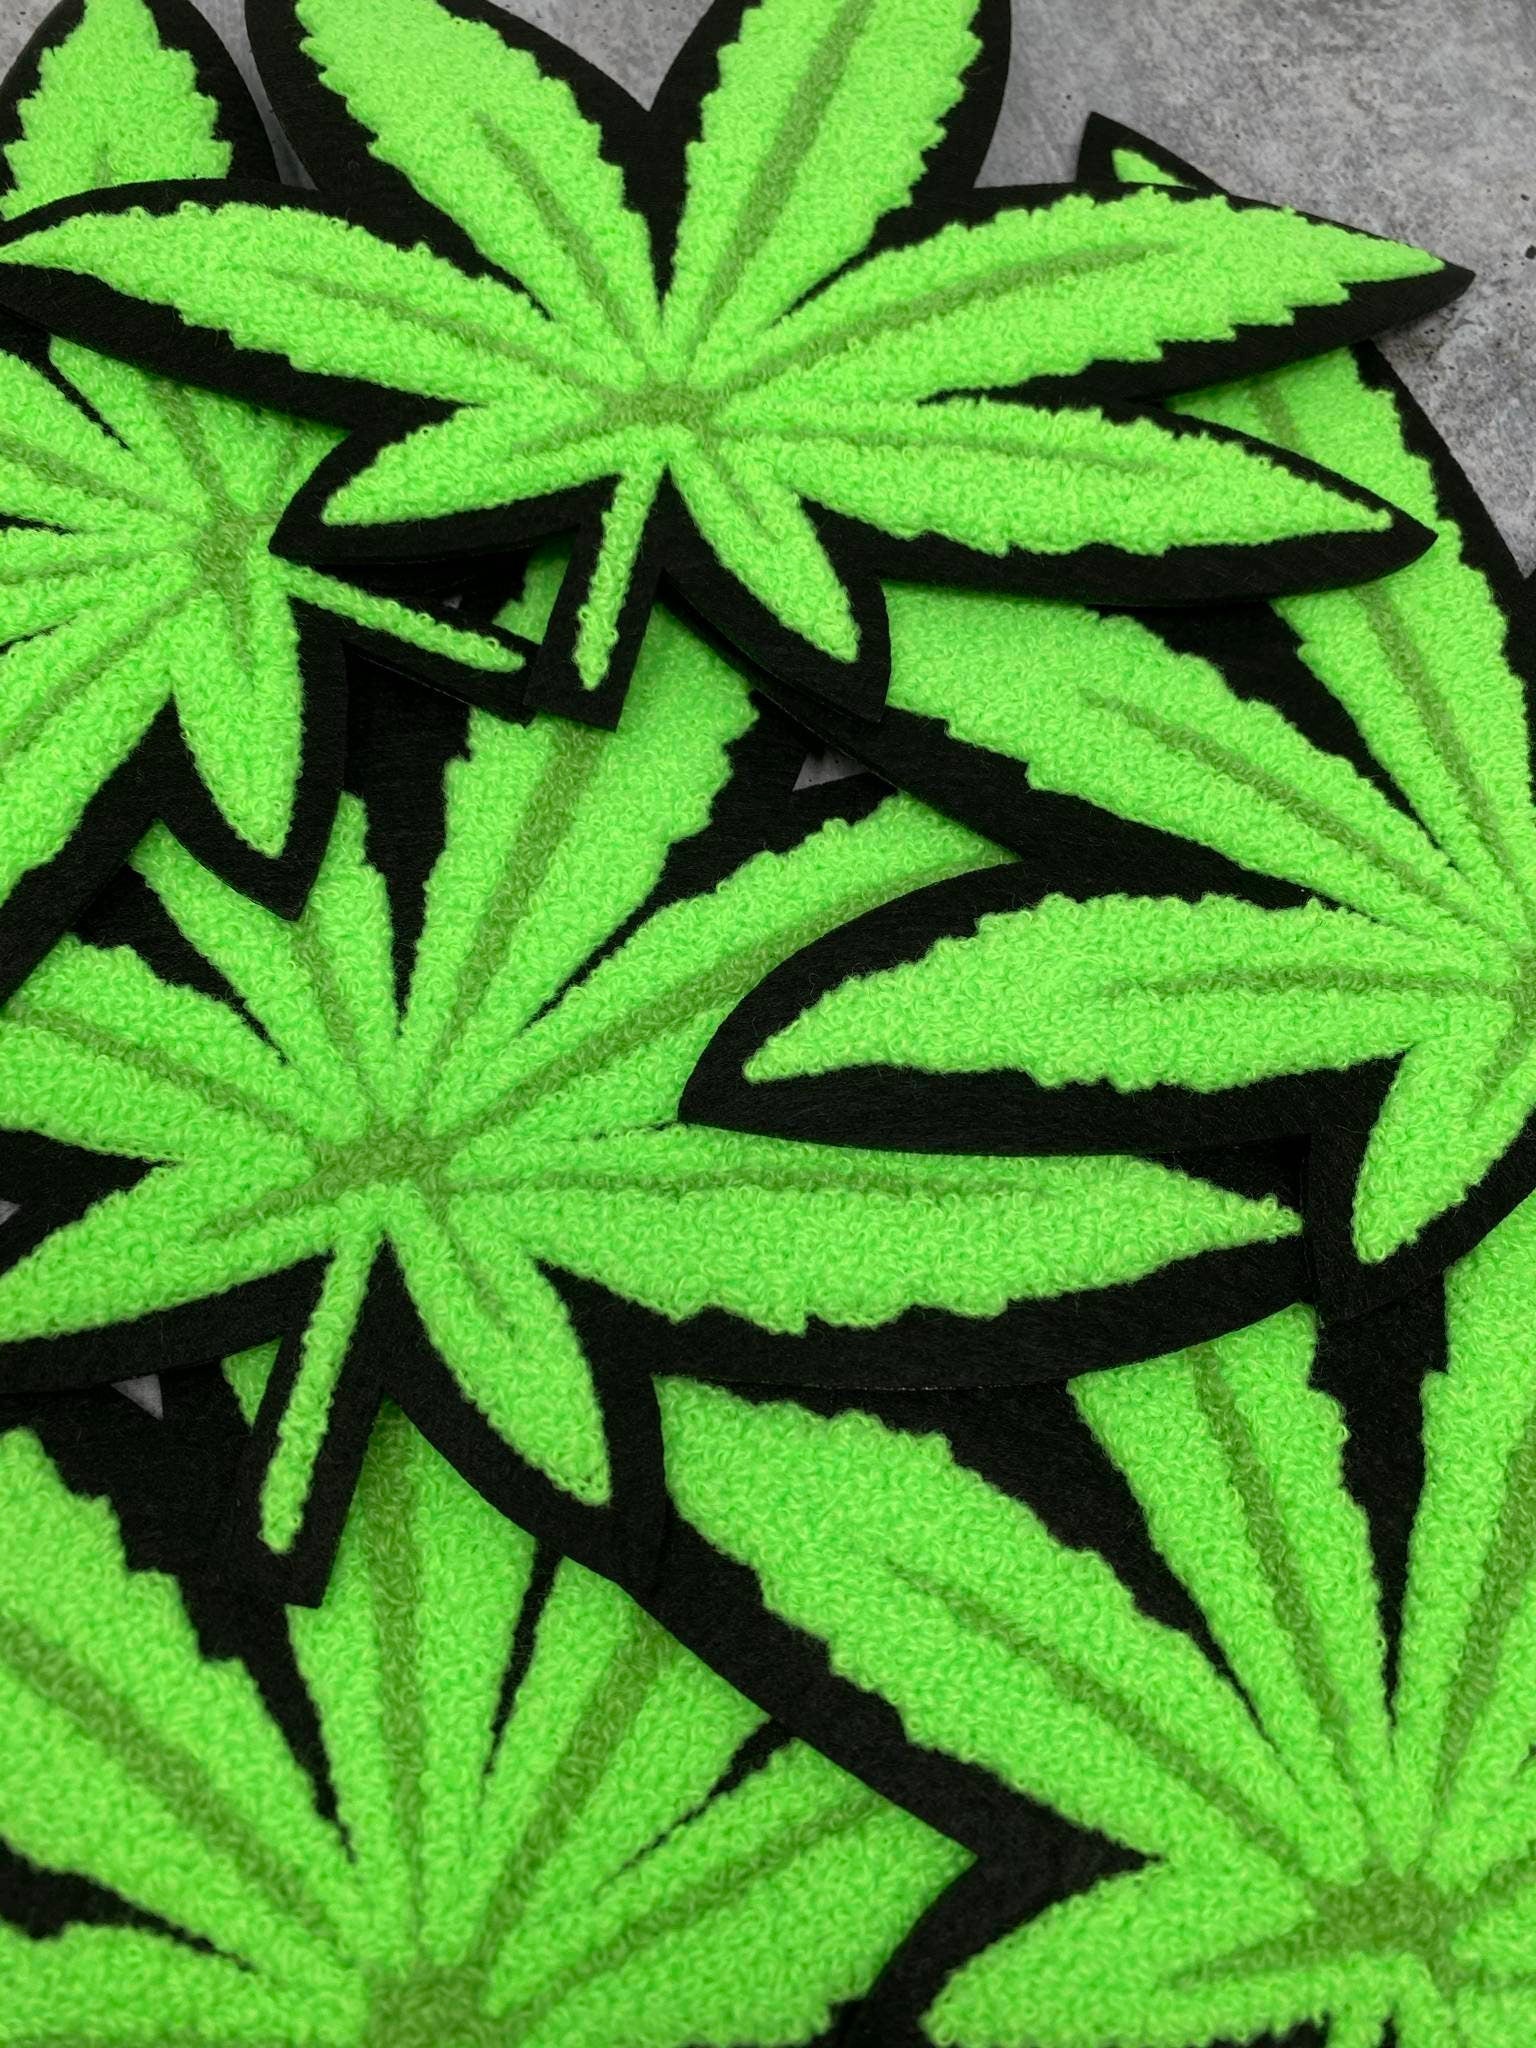 New, Neon Green, CHENILLE "Cannabis Leaf", Size 9", Iron-on Patch, Patches for Weed Lovers, Cannibas Badge, THC, CBD Lover, Weed Leaf, 1 pc